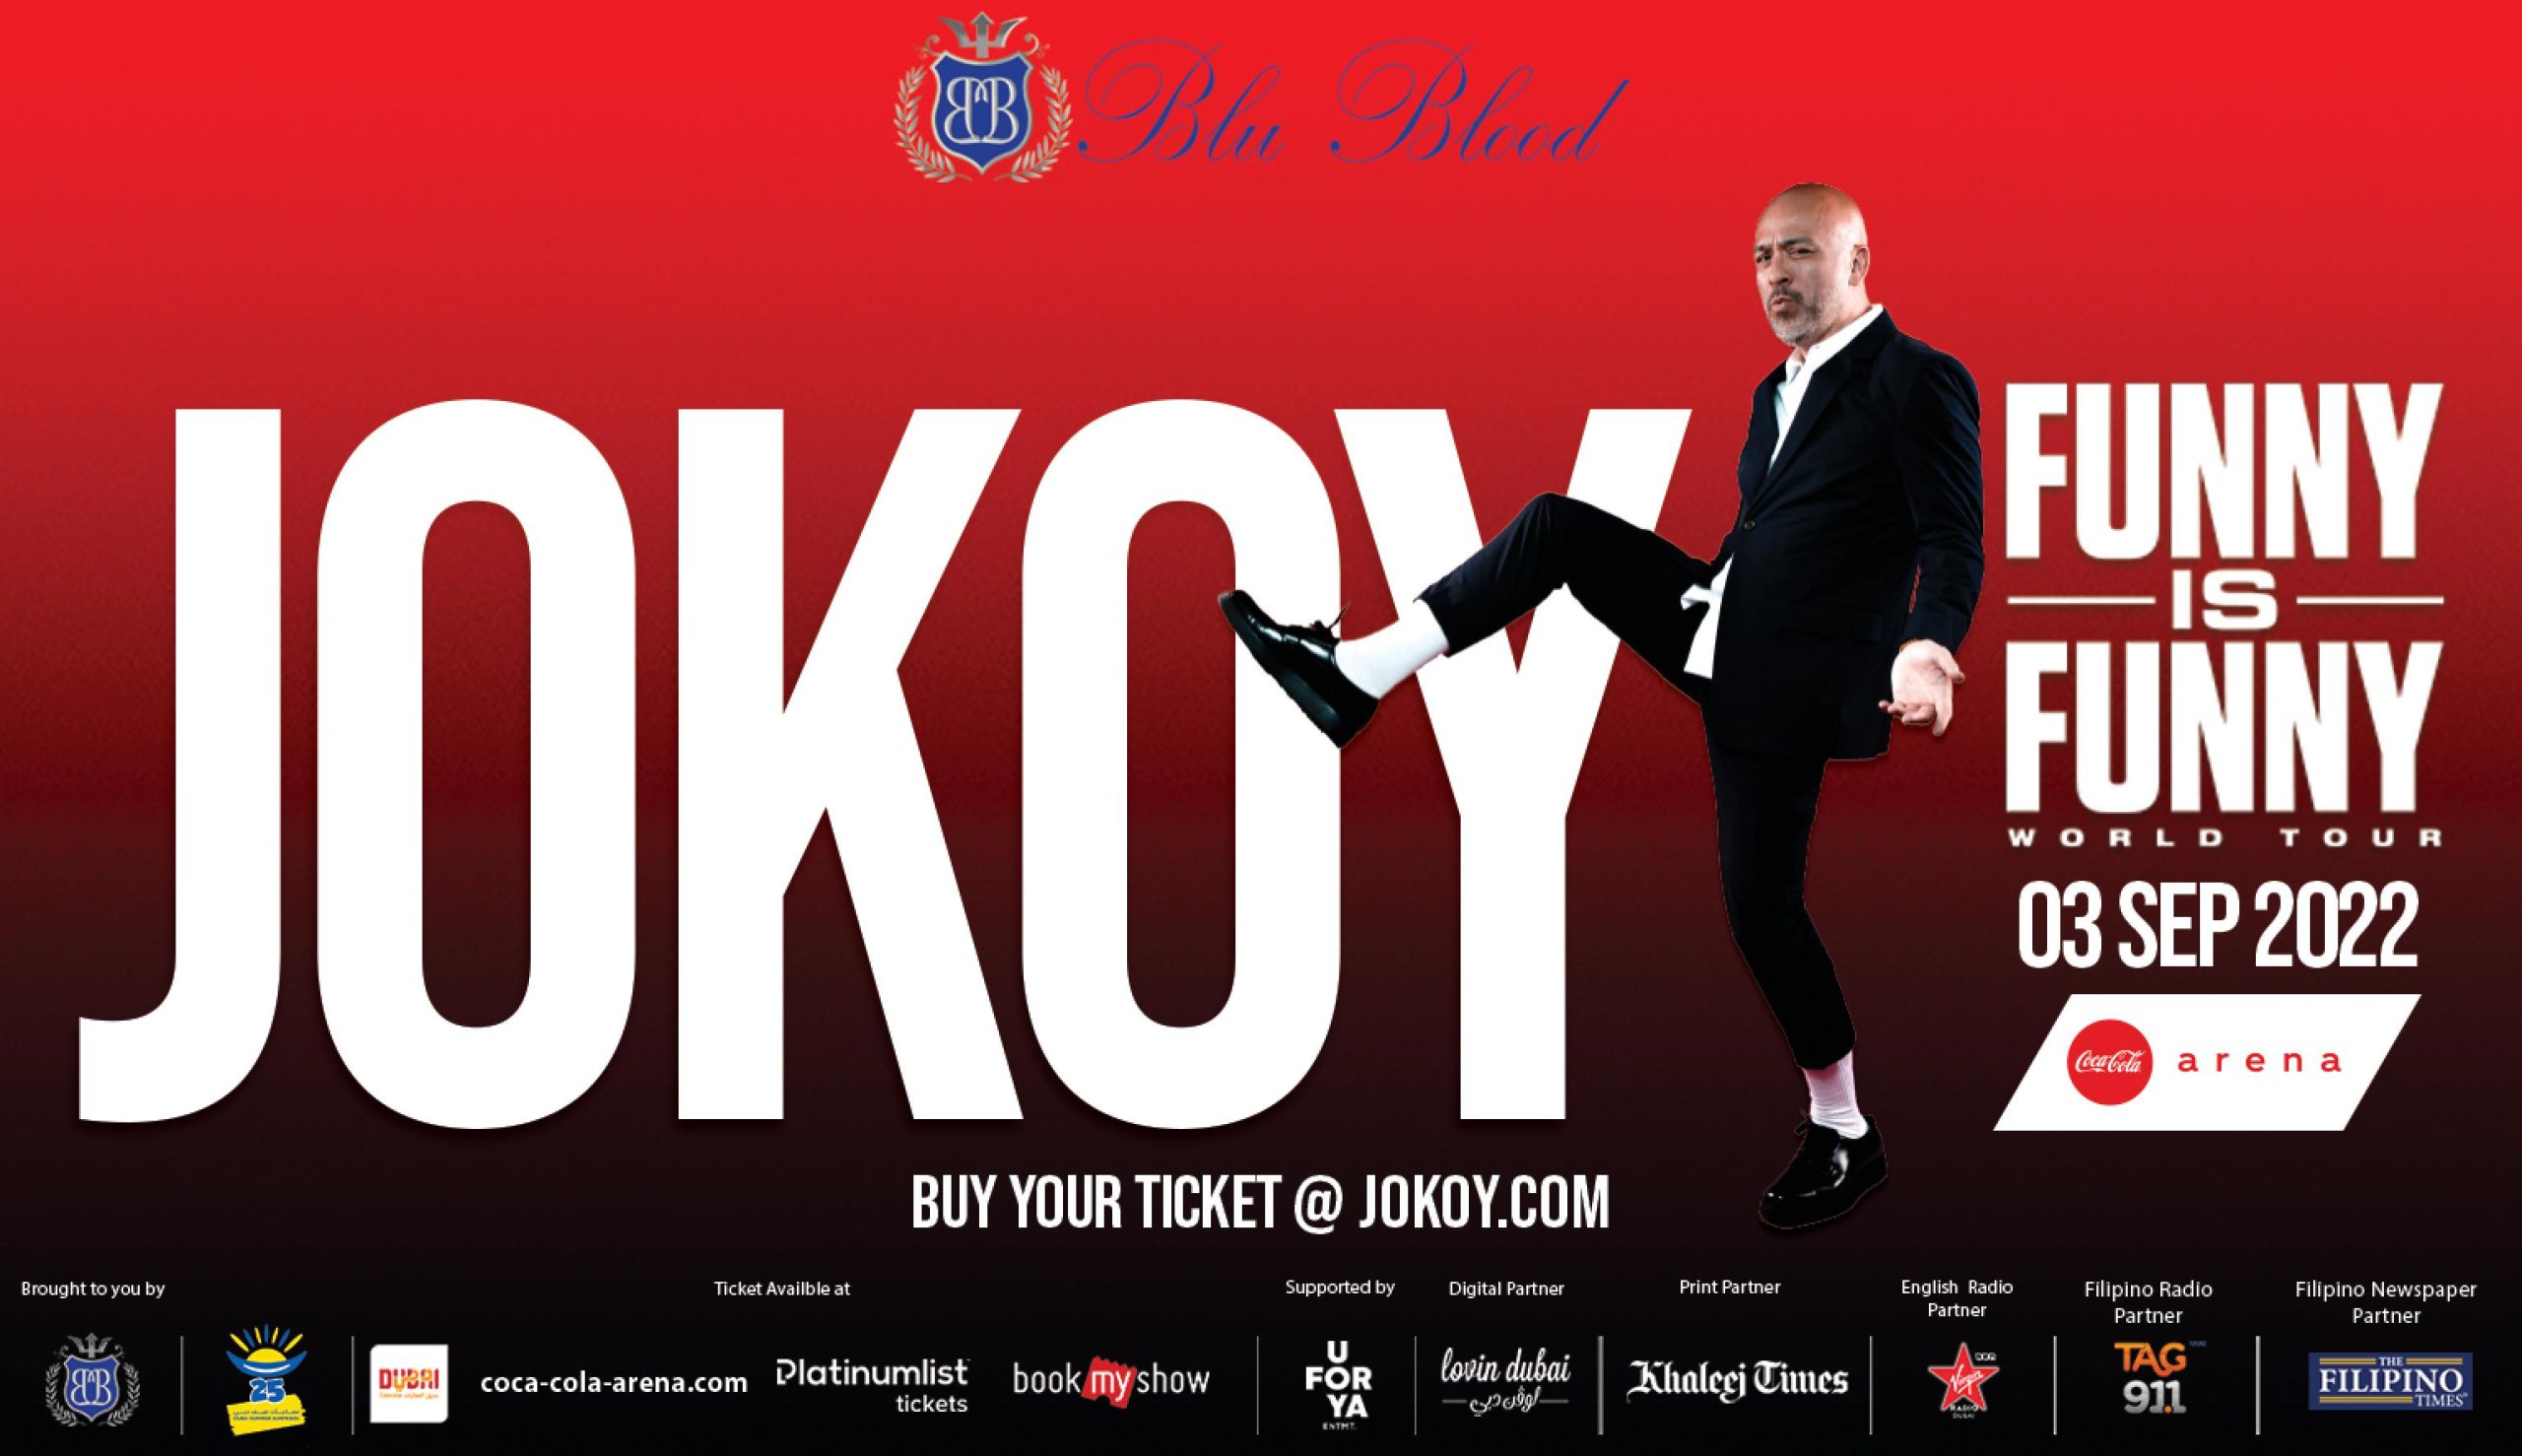 LIMITED TICKETS LEFT! Watch Jo Koy live on stage in Dubai at Funny is Funny tour this September 3